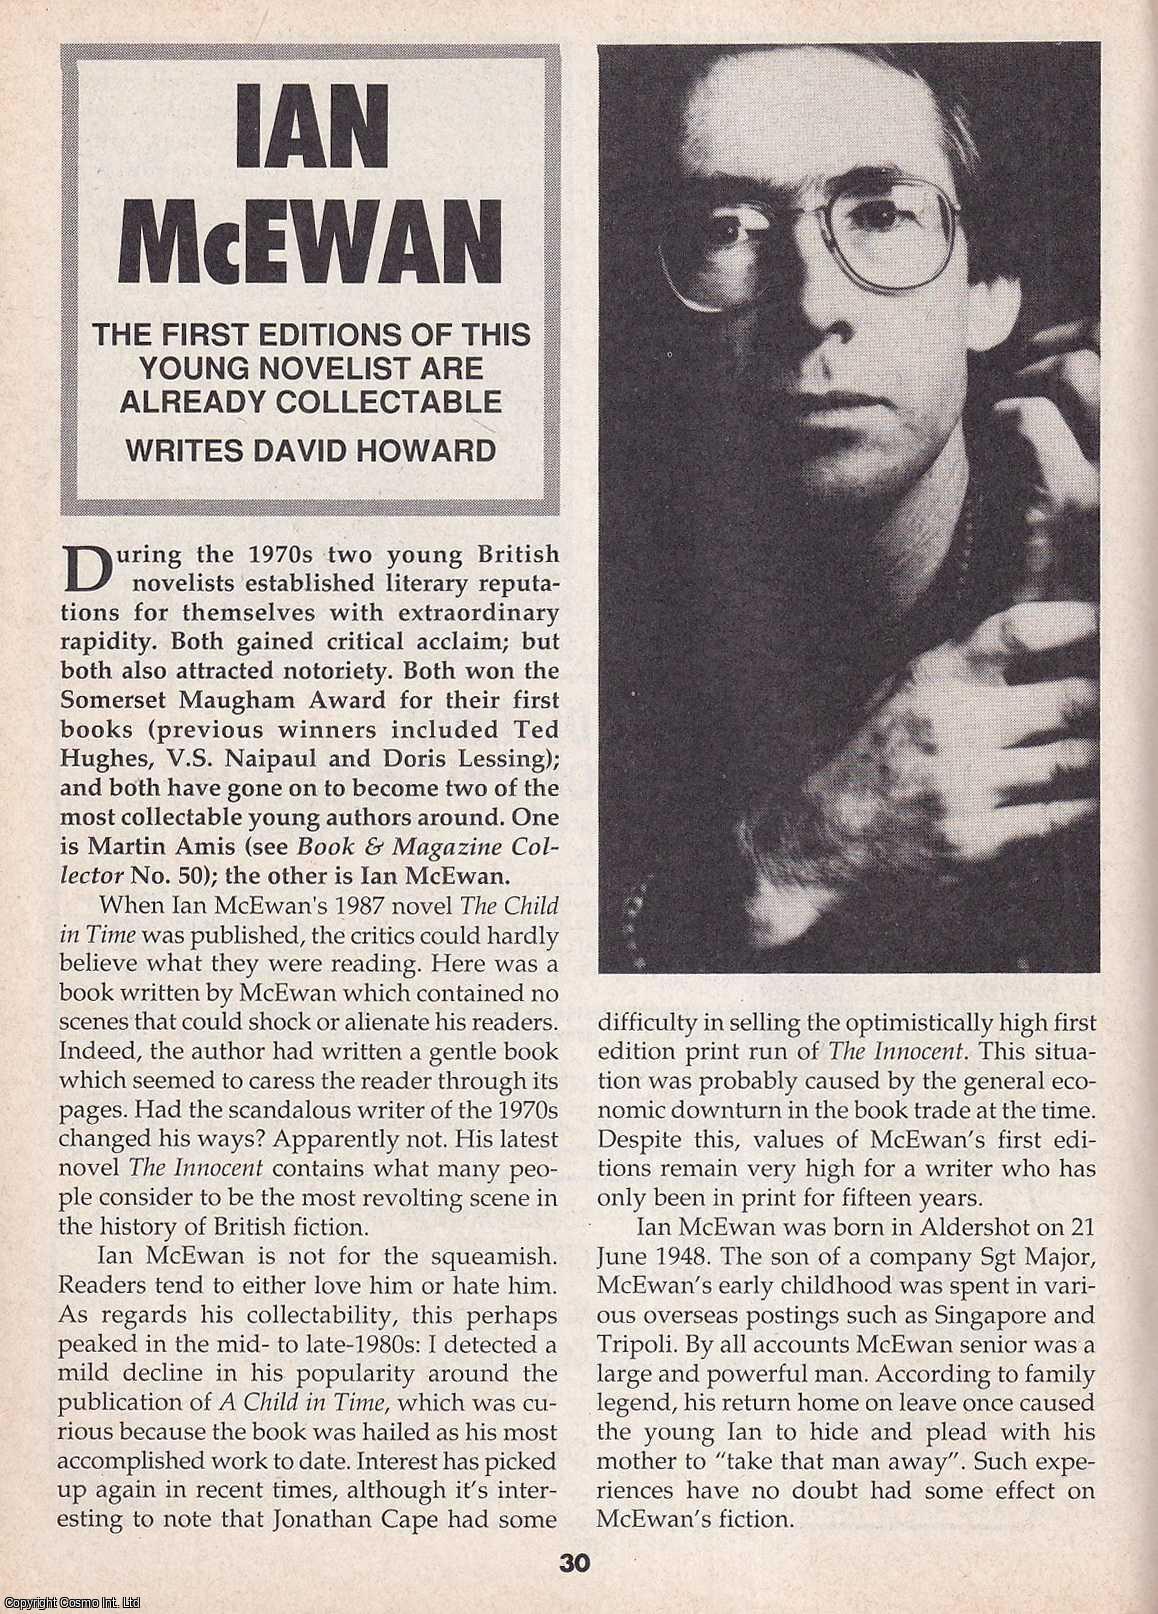 David Howard - Ian McEwan : First Editions. This is an original article separated from an issue of The Book & Magazine Collector publication, 1991.